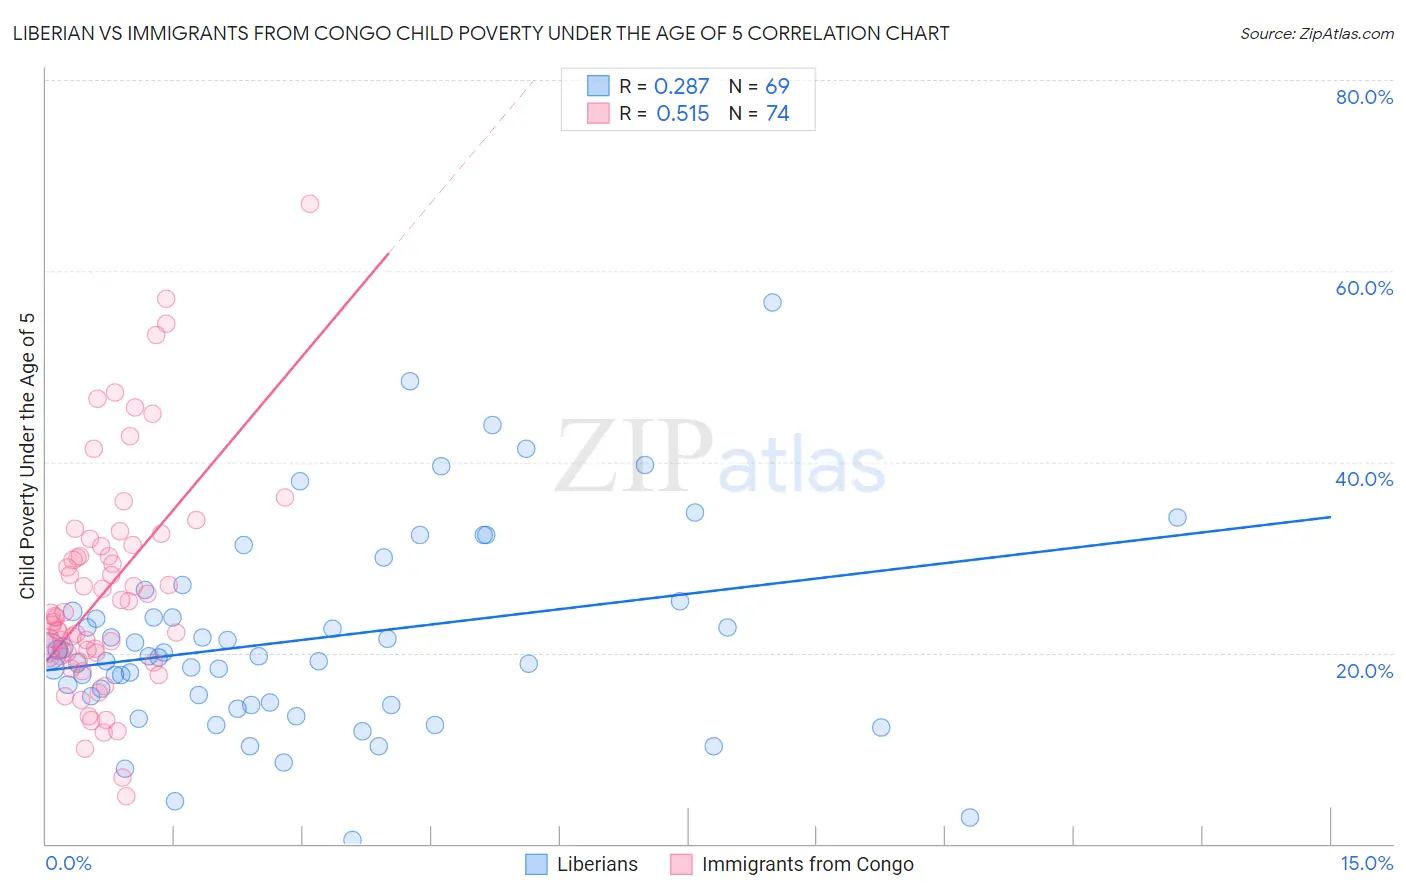 Liberian vs Immigrants from Congo Child Poverty Under the Age of 5